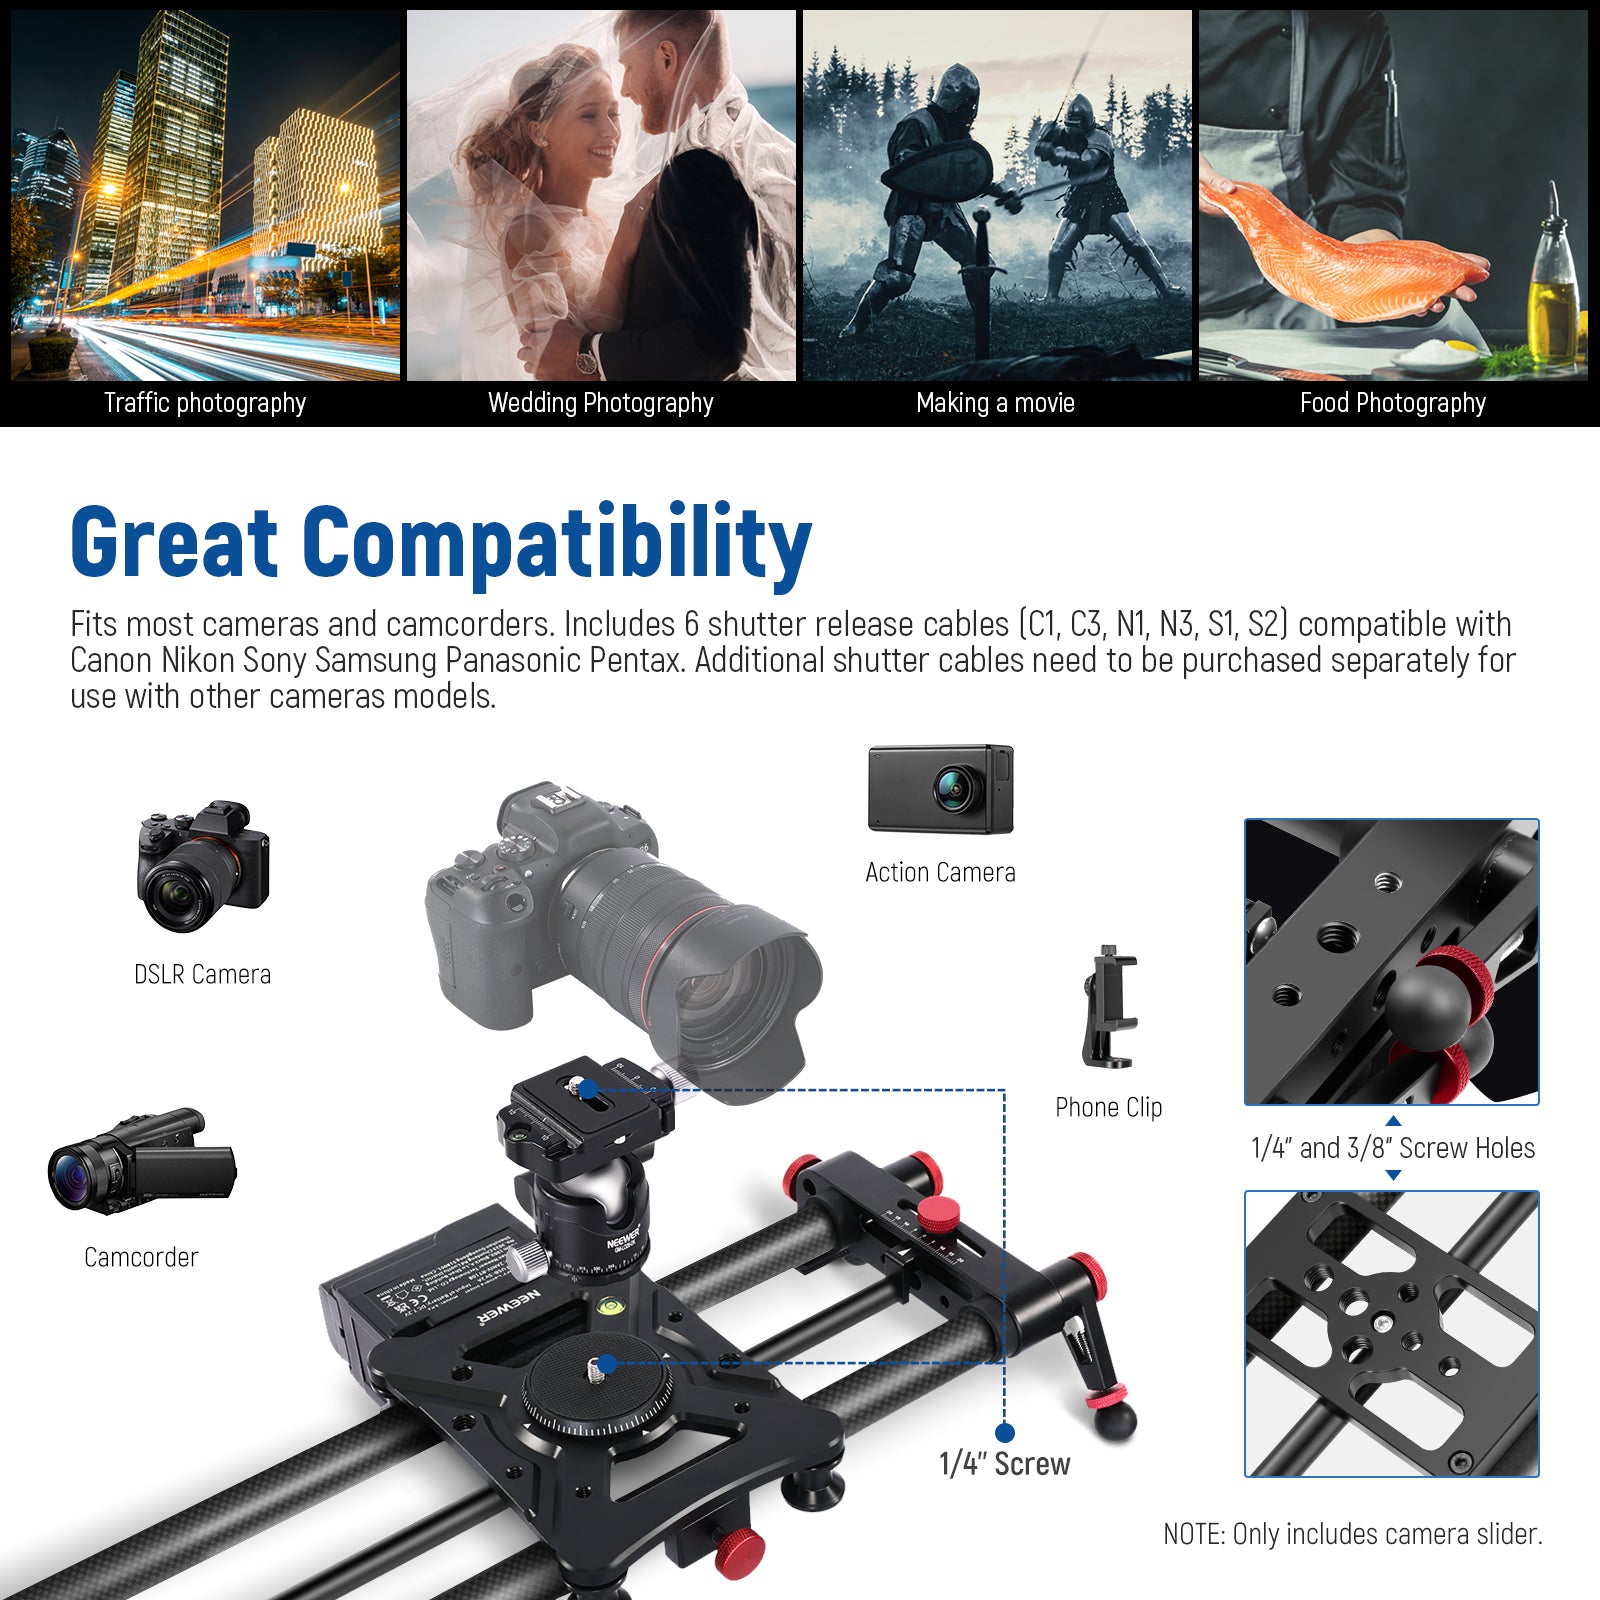  GVM Great Video Maker Camera Motorized Slider,48/120CM,Automatic  Round Trip,Time Lapse,Panoramic Shooting,Video Capture,Slider Smooth and  Stable,with Battery : Electronics